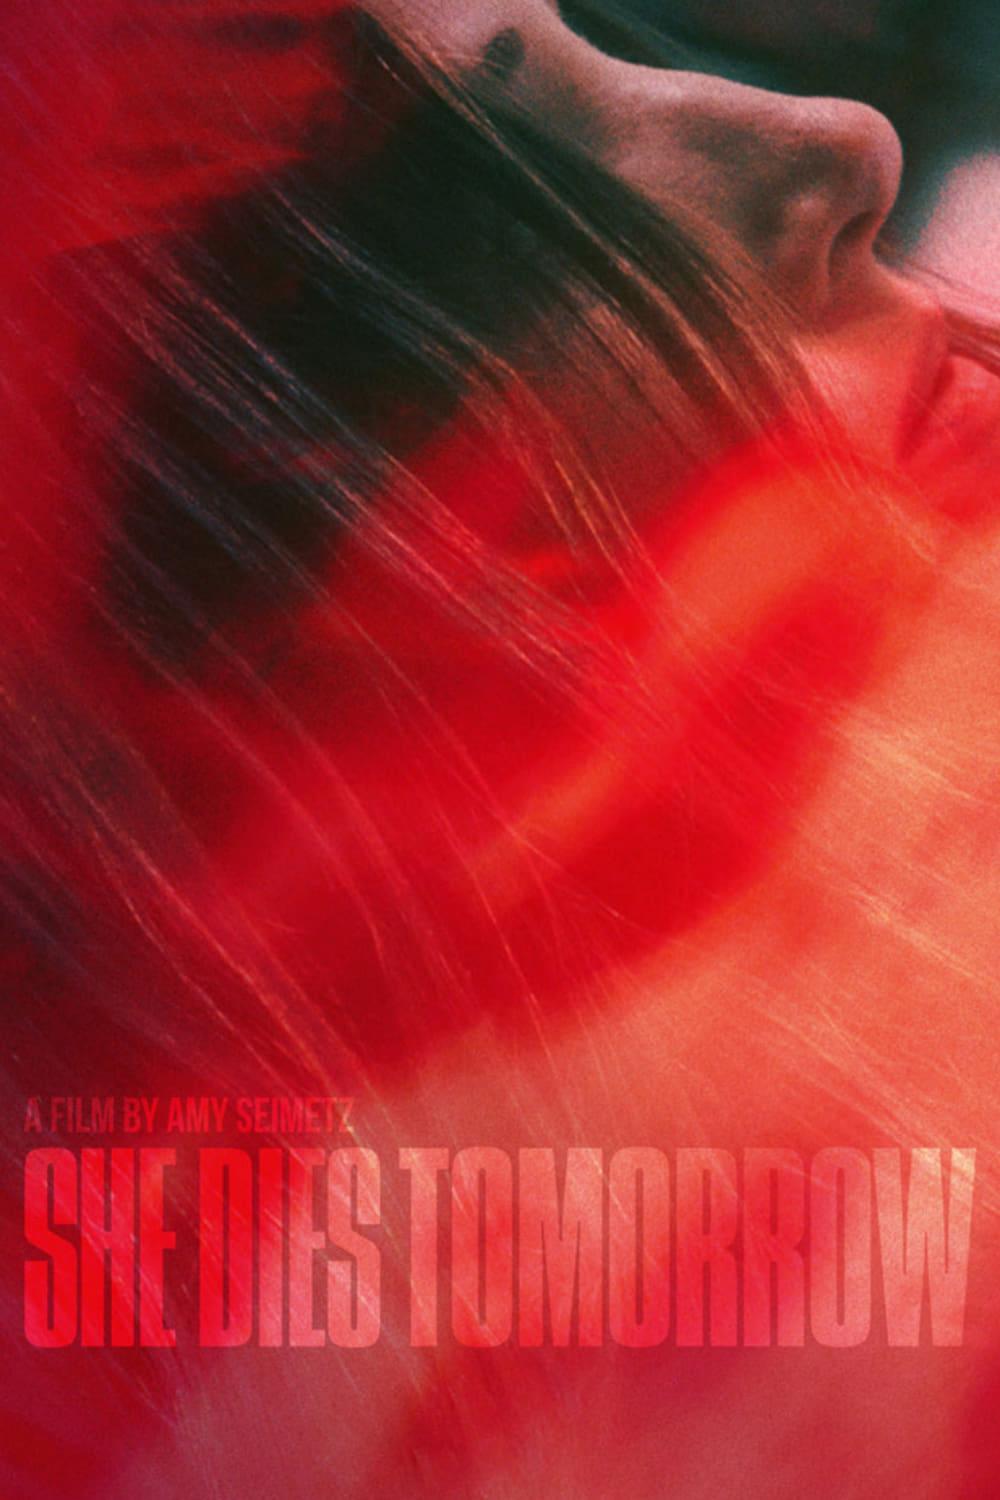 She Dies Tomorrow poster